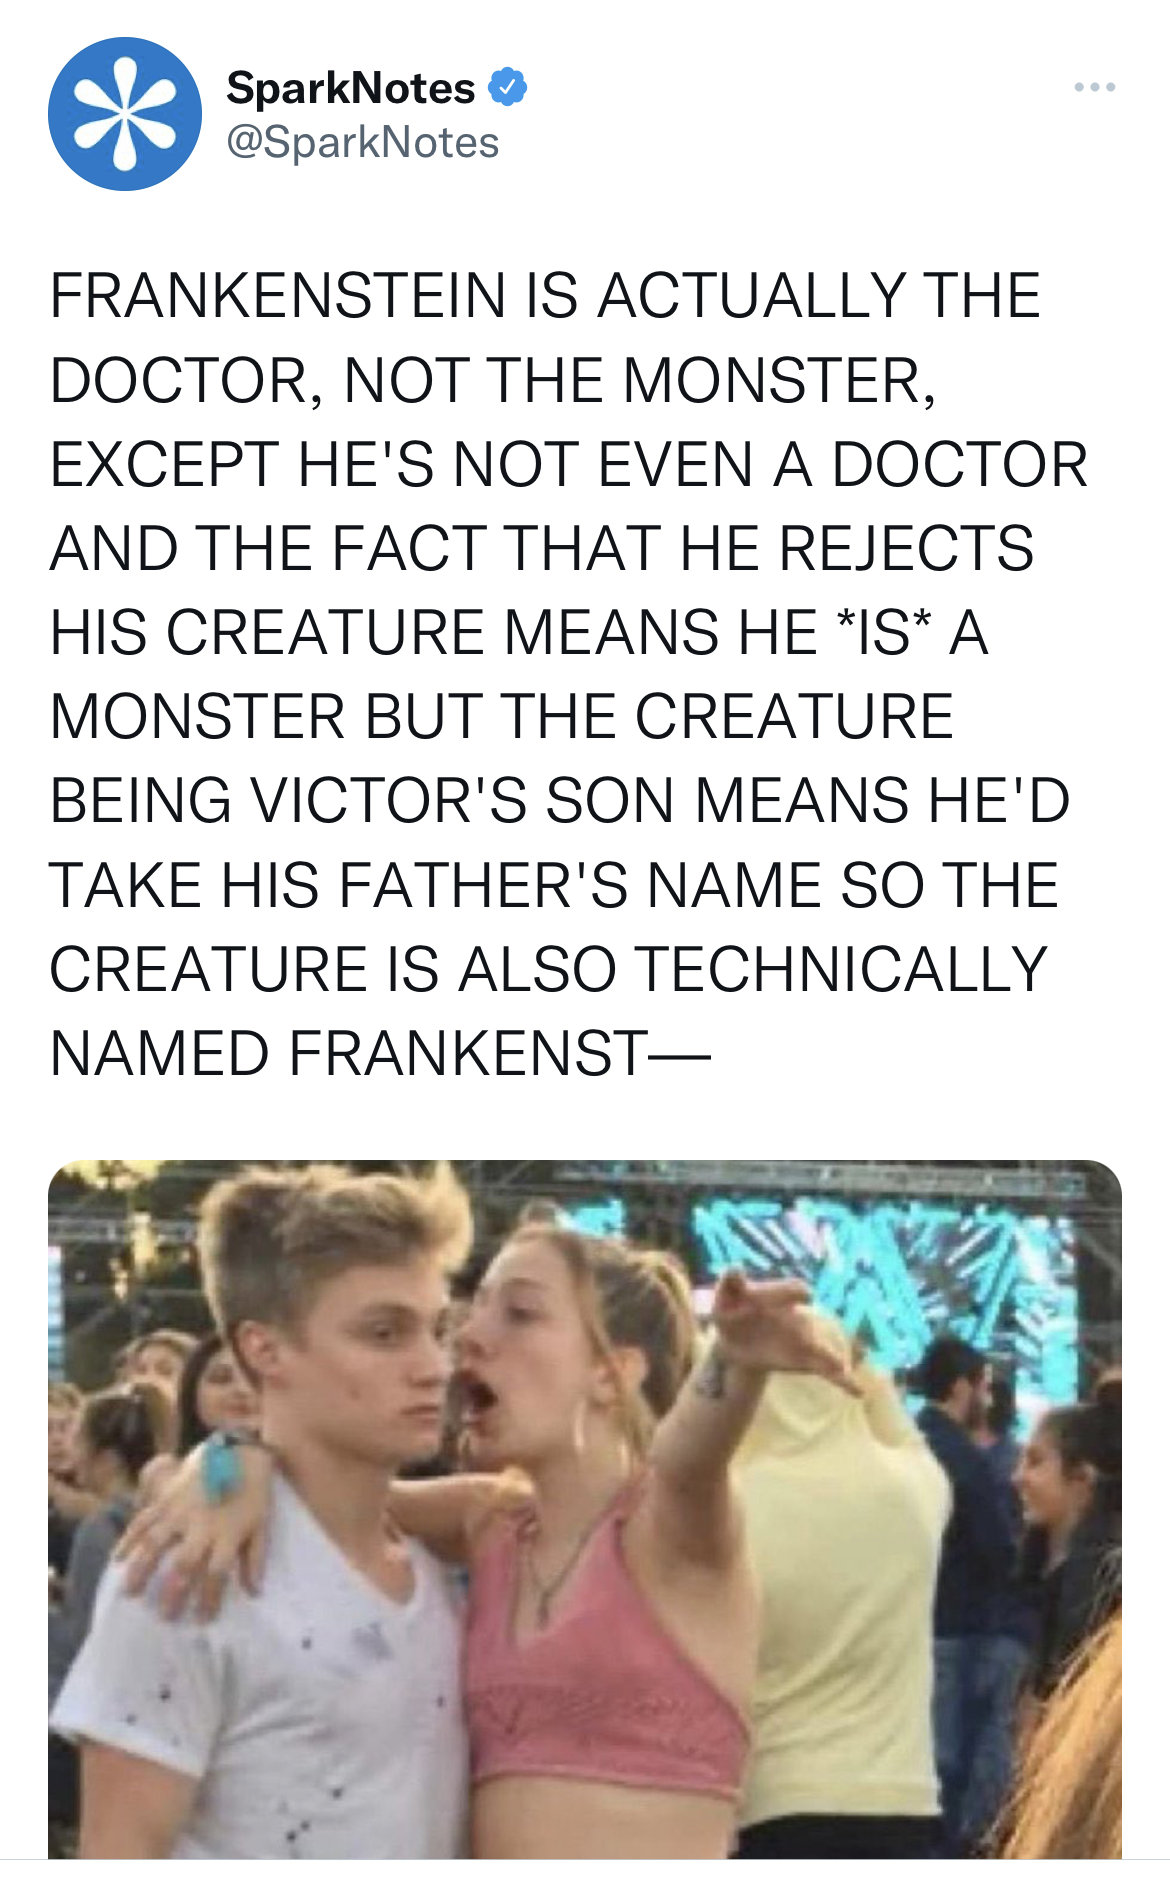 filthy and funny tweet - 2 letter scrabble words - SparkNotes Frankenstein Is Actually The Doctor, Not The Monster, Except He'S Not Even A Doctor And The Fact That He Rejects His Creature Means He Is A Monster But The Creature Being Victor'S Son Means He'